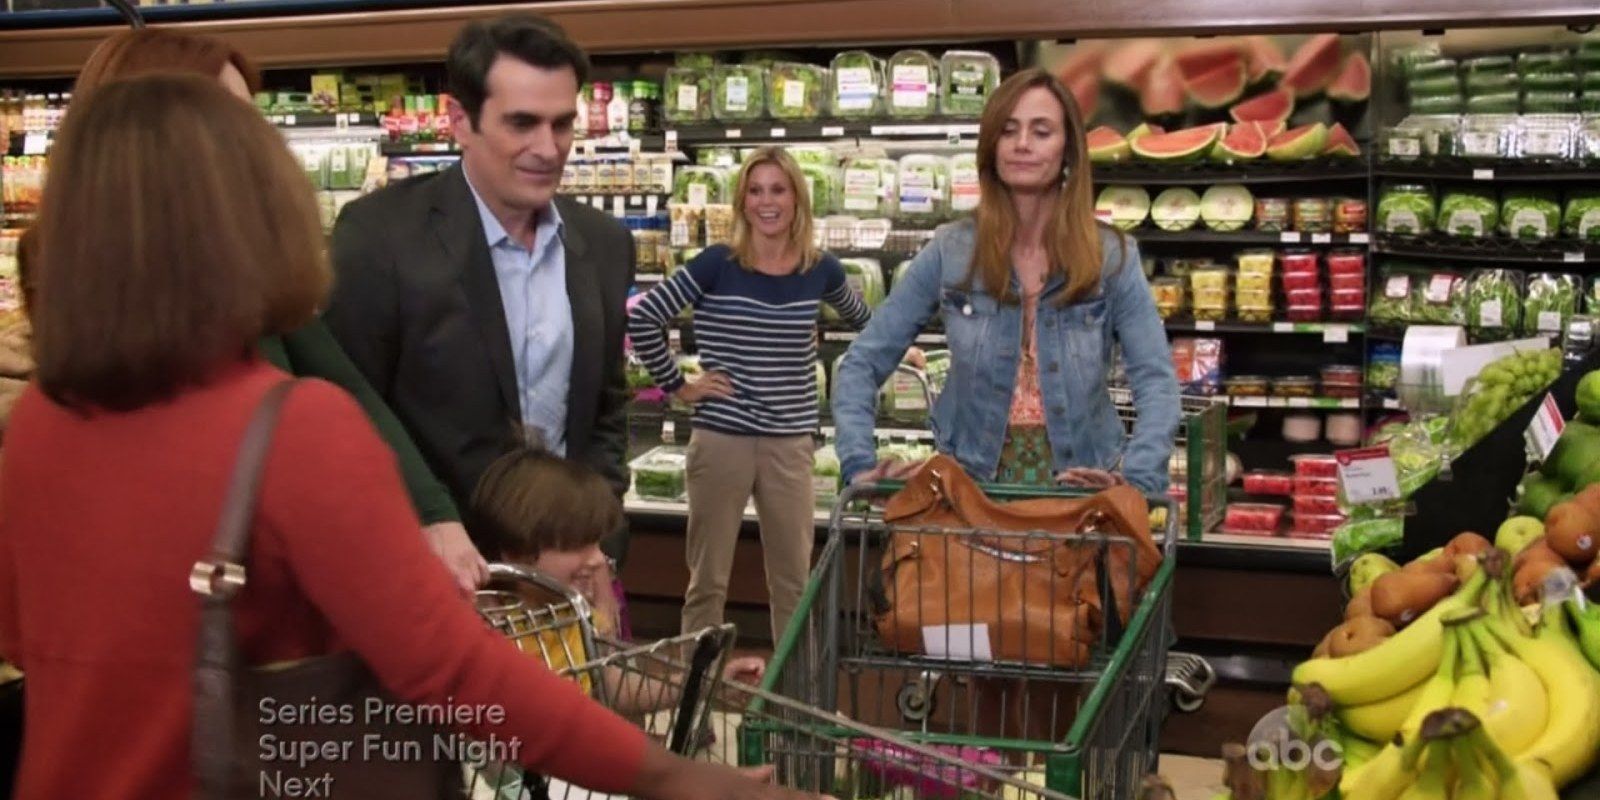 phil-dunphy-and-the-divorced-women-modern-family at grocery store